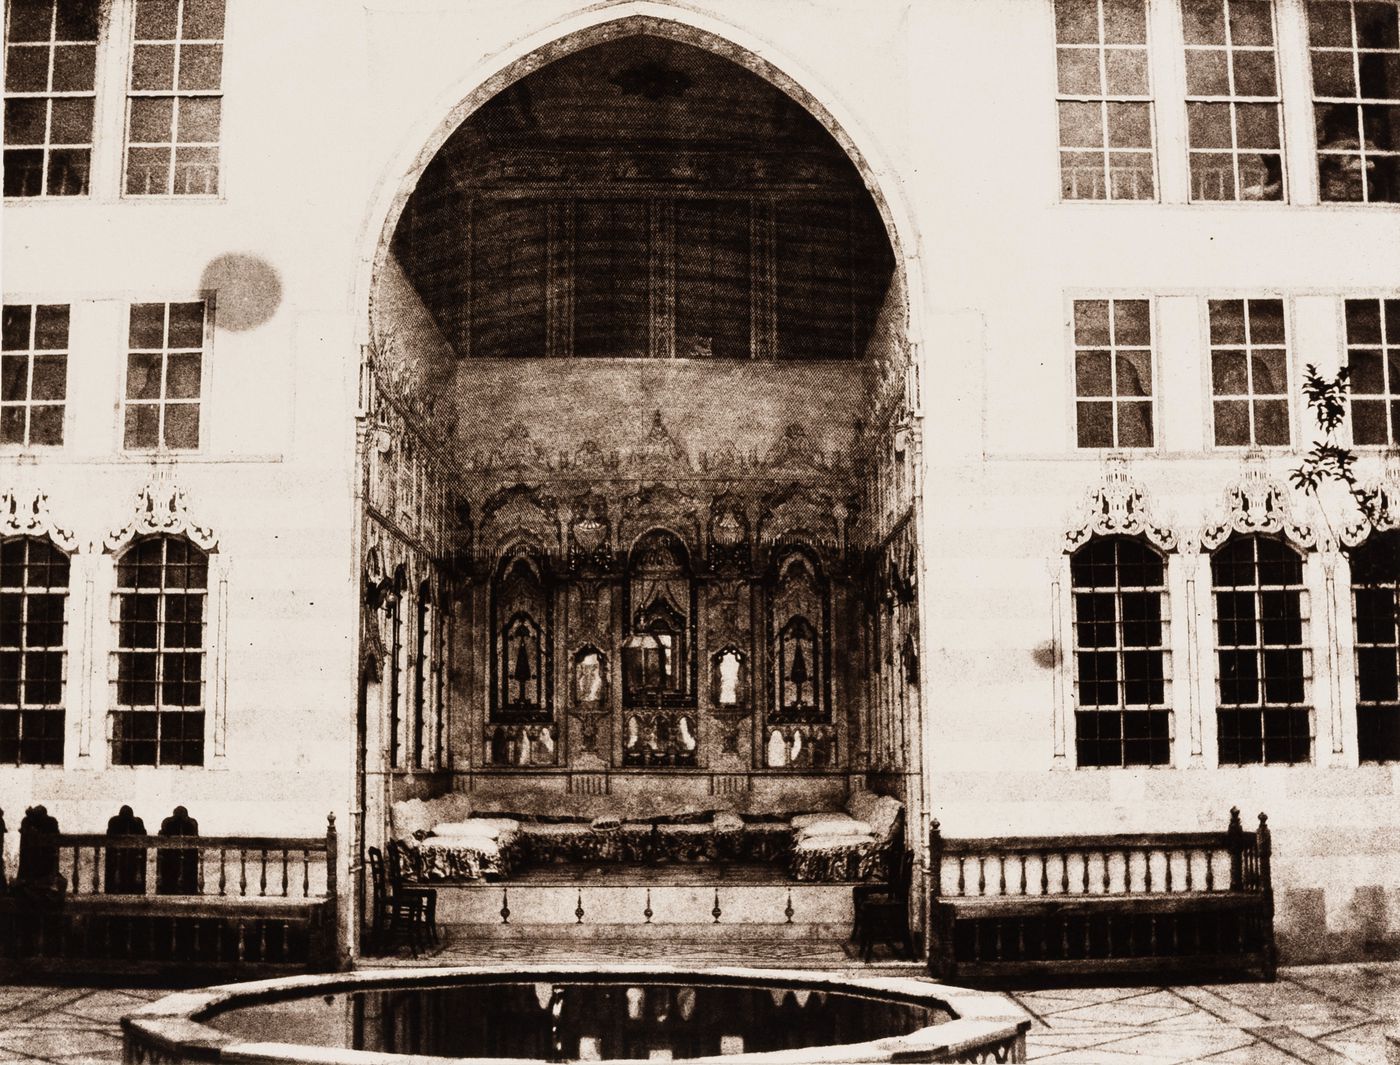 View of an iwan of the Christian House "Homsi", Damascus, Ottoman Empire (now in Syria)